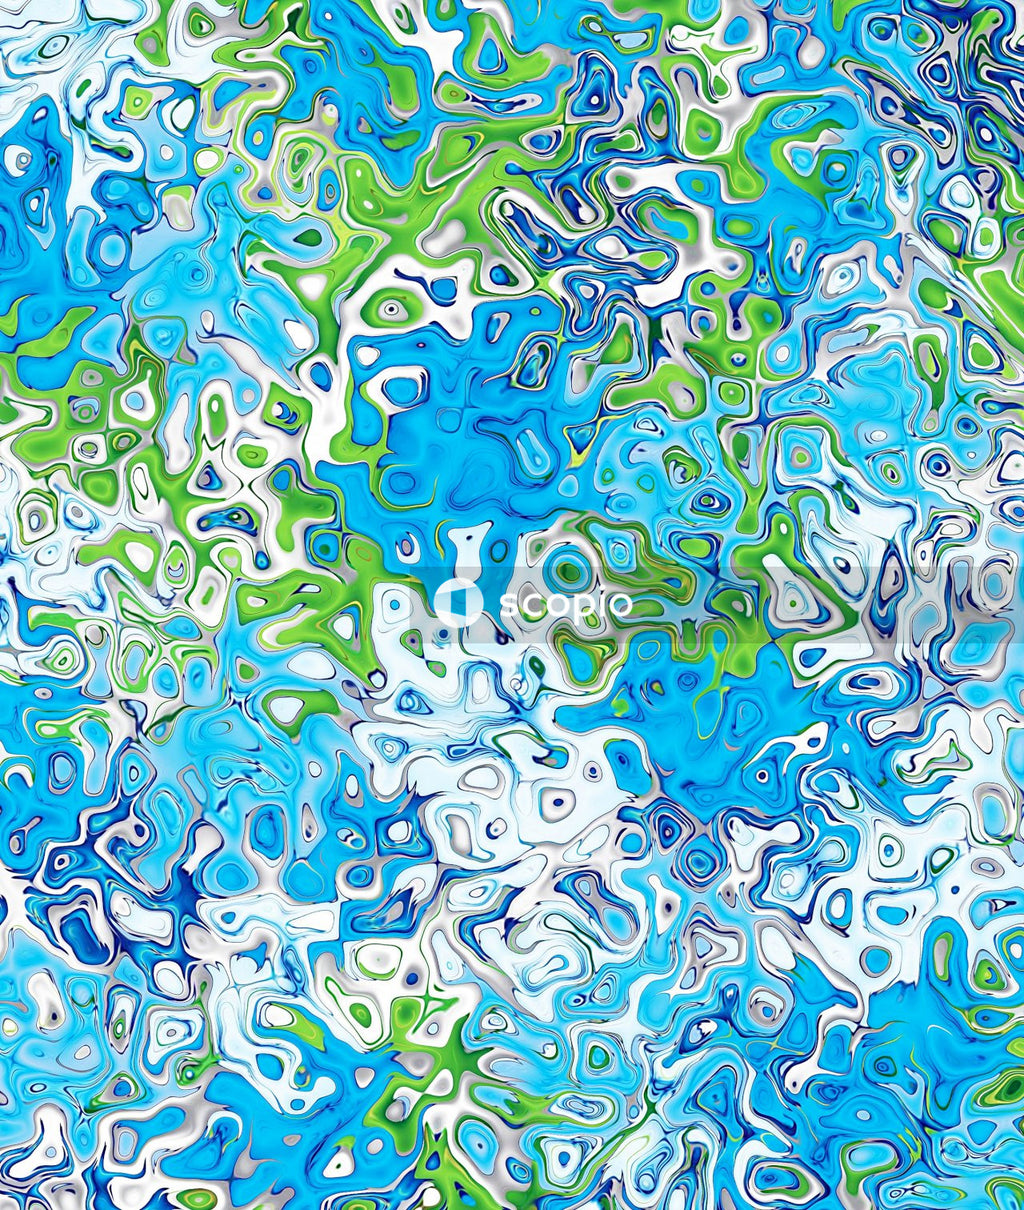 Green blue and white abstract painting